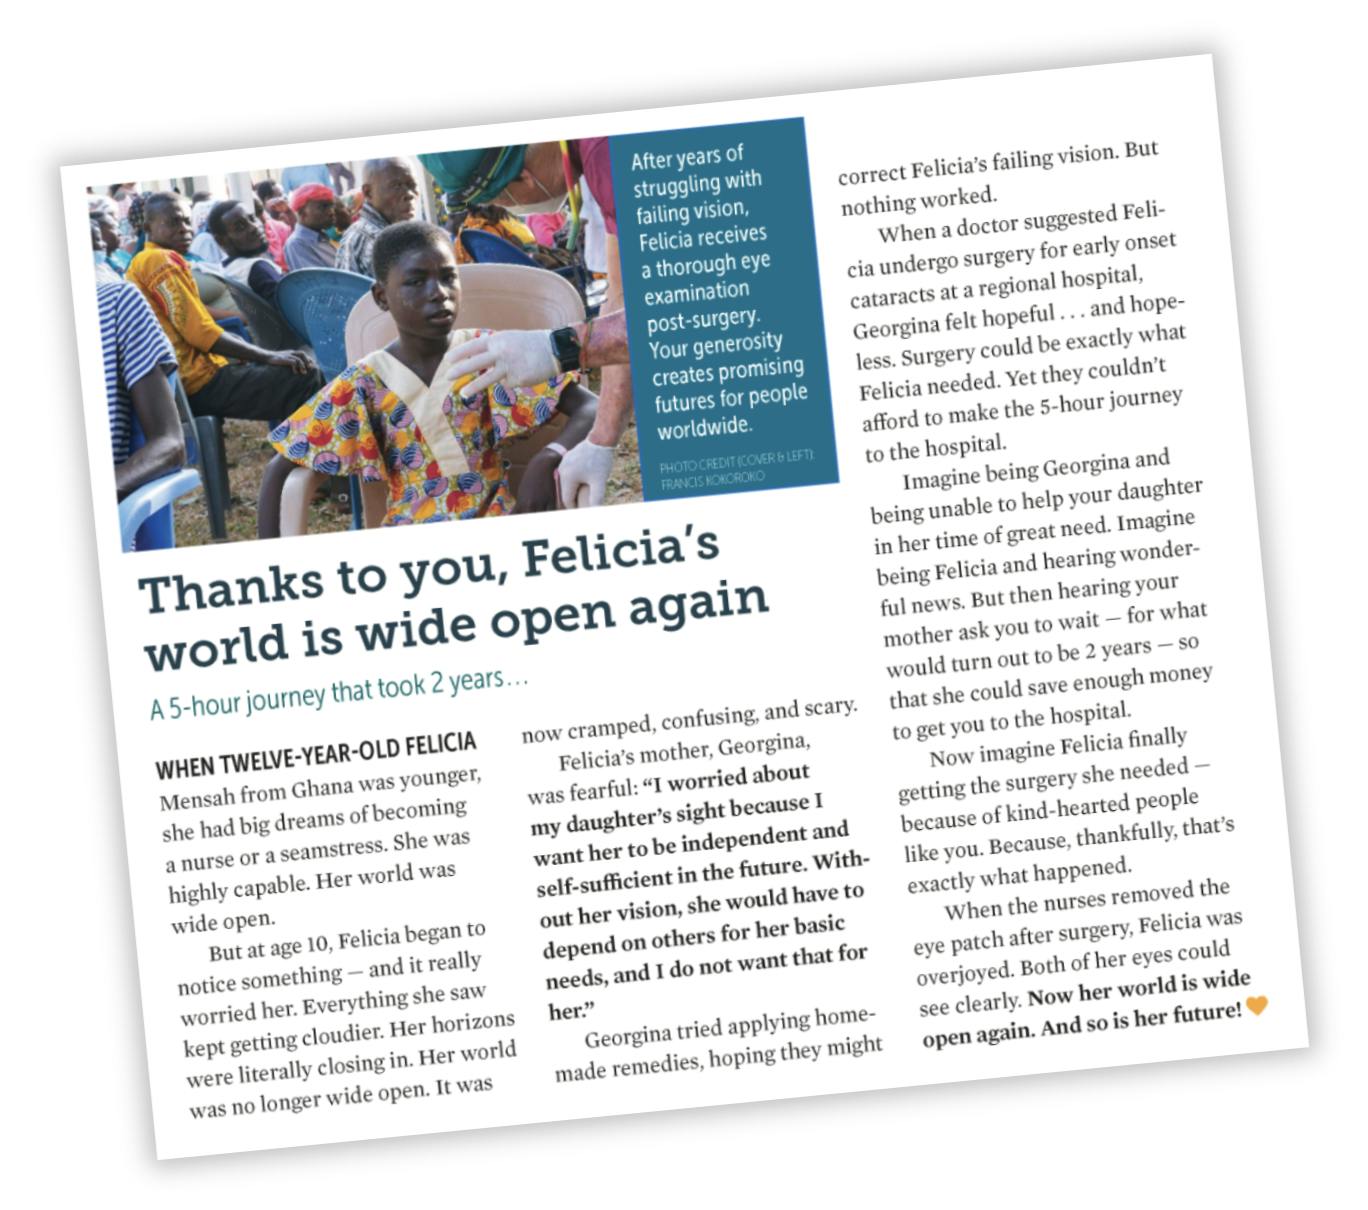 Image of a newsletter impact story. The head line is: Thanks to you, Felicia's world is wide open again"